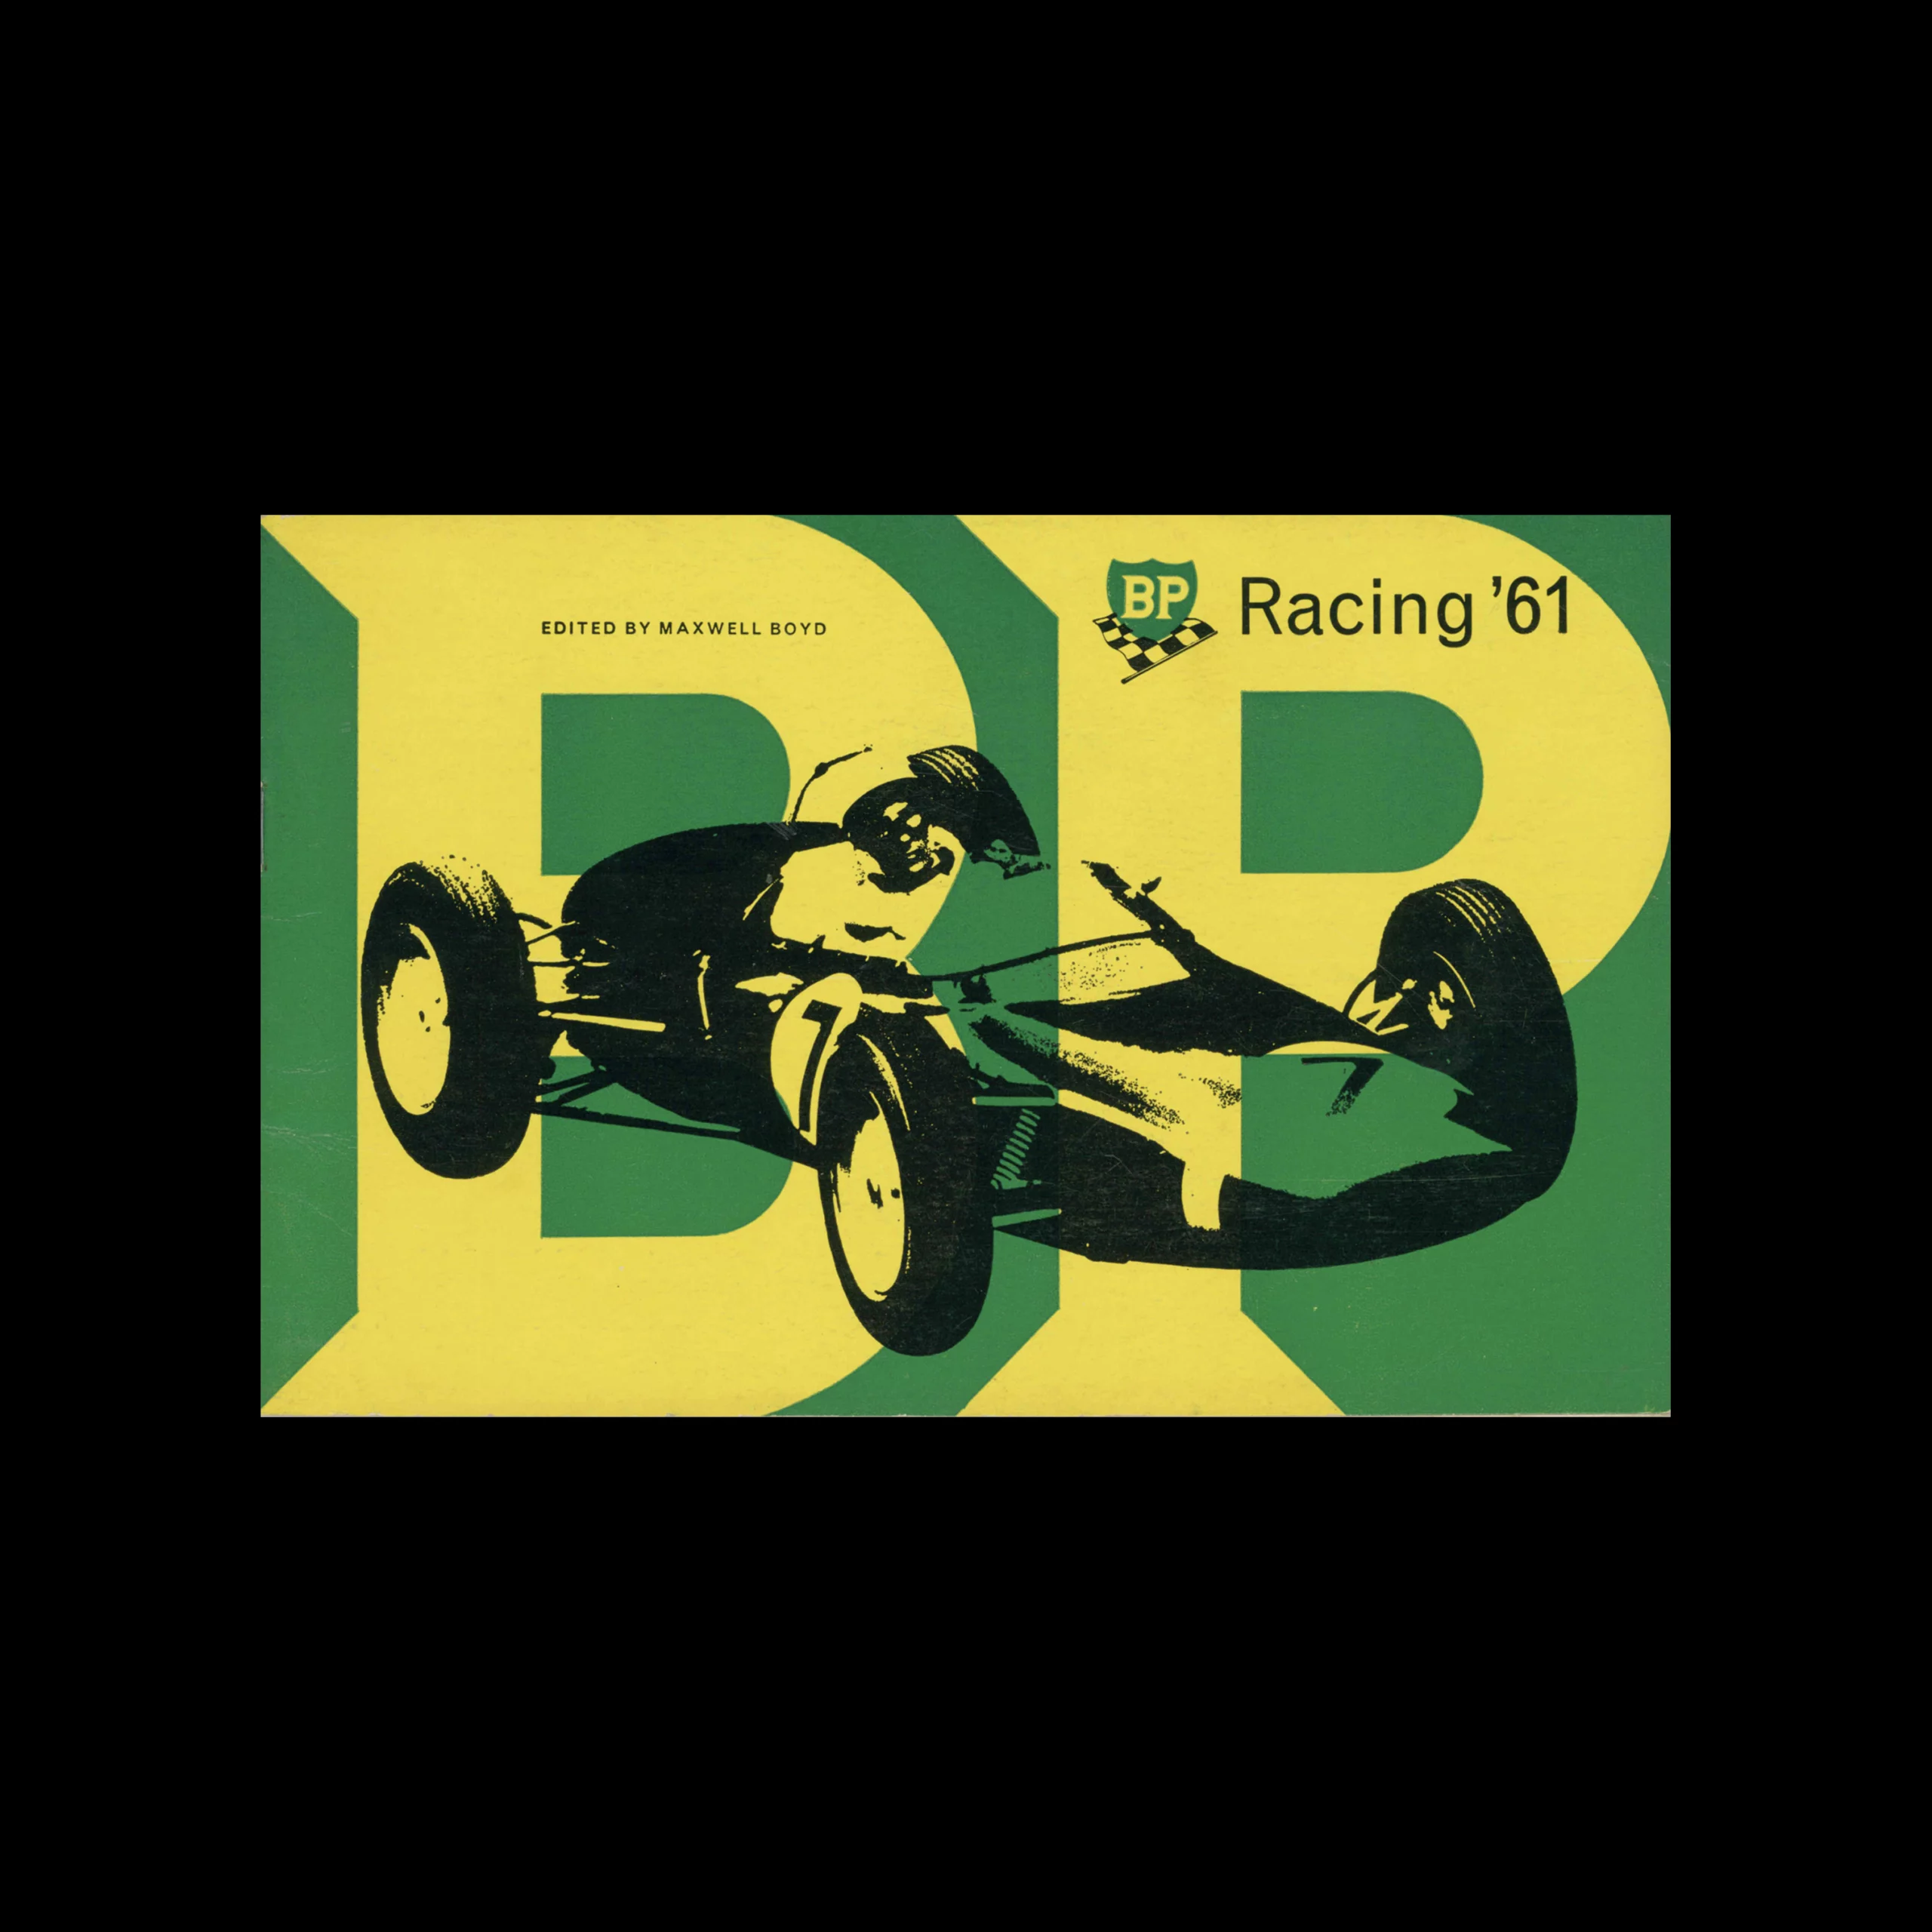 BP Racing '61, BP, 1961 Designed by Newman Neame Limited